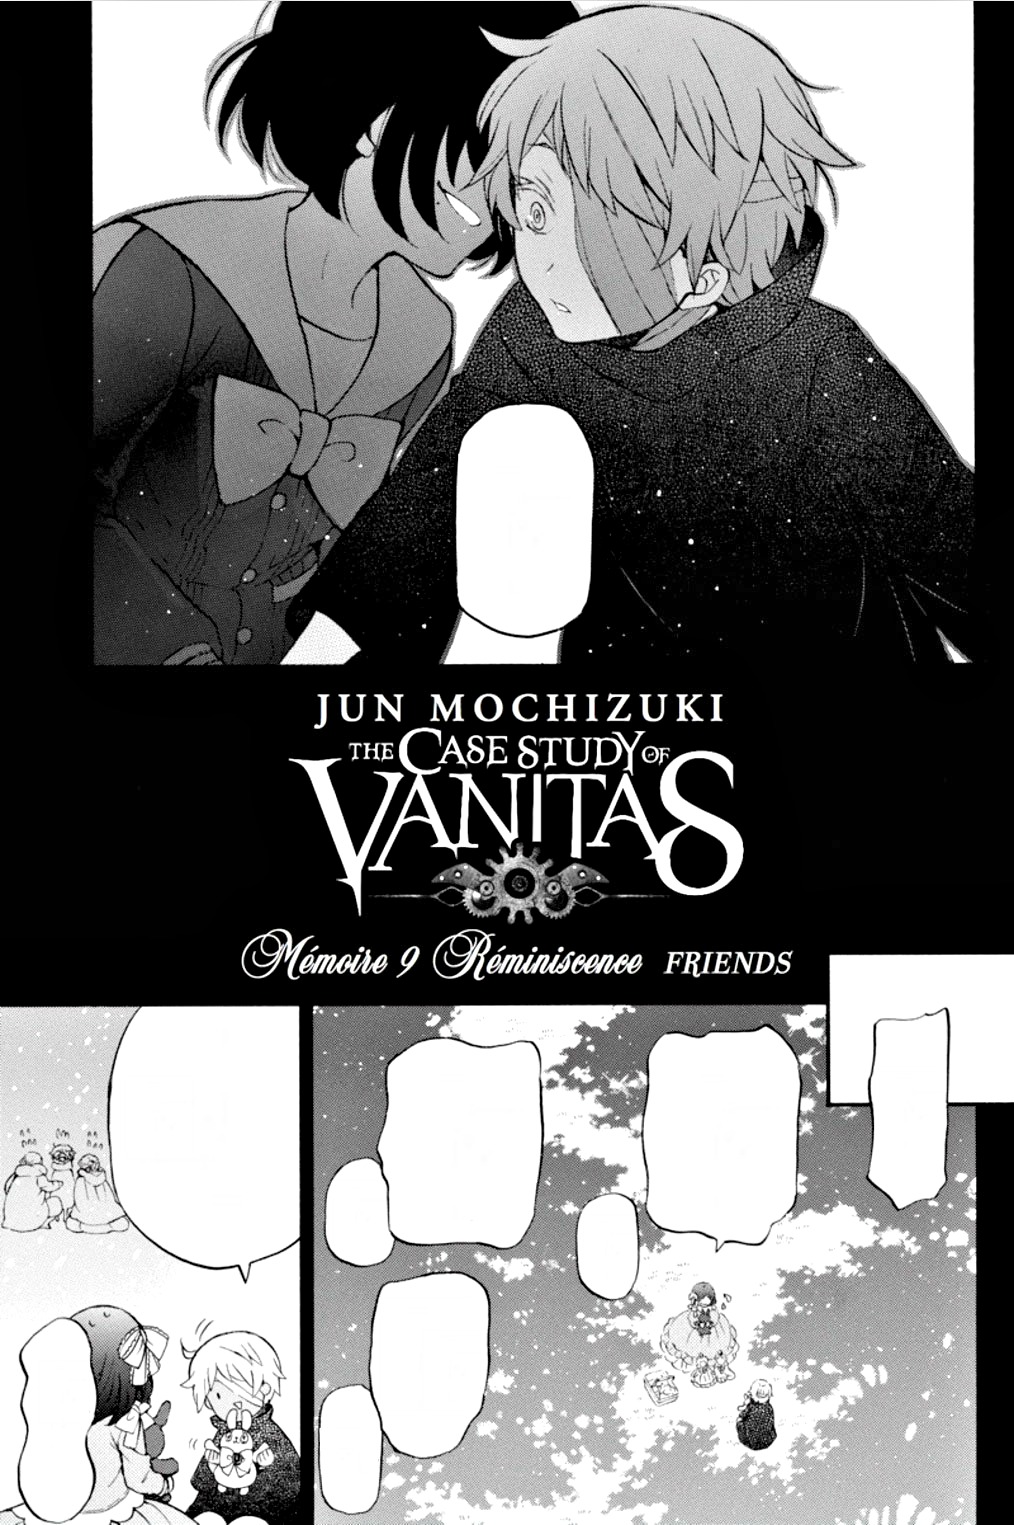 The Case Study of Vanitas ep.8 - Read the Room I drink and watch anime